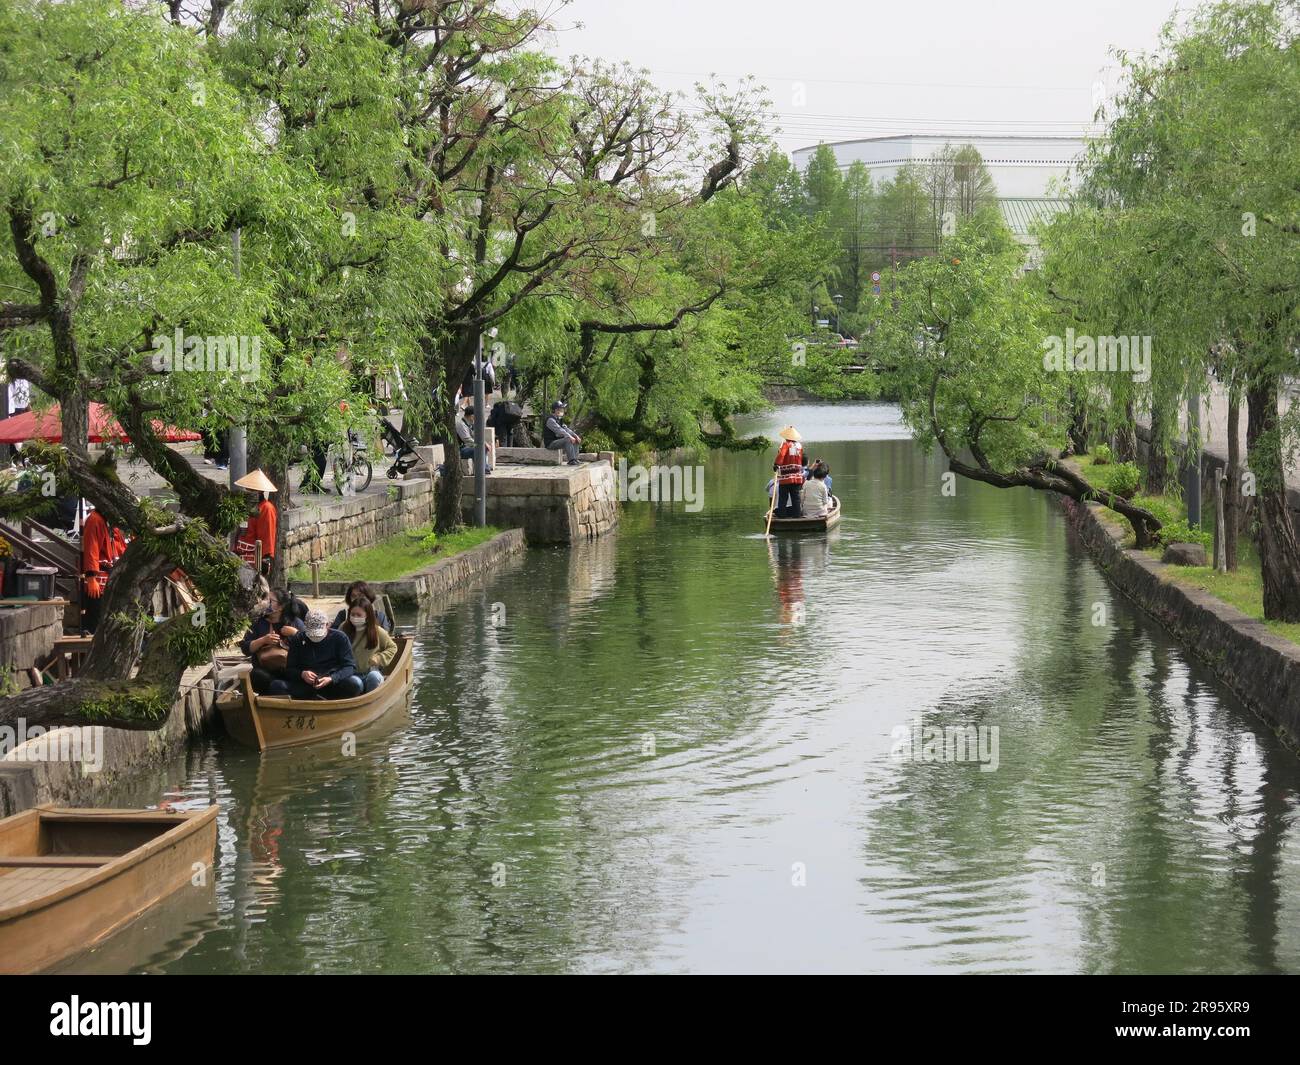 Punts with boatmen in traditional costume provide a leisurely sail along the canal for tourists to the quaint old town of Kurashiki, Japan. Stock Photo